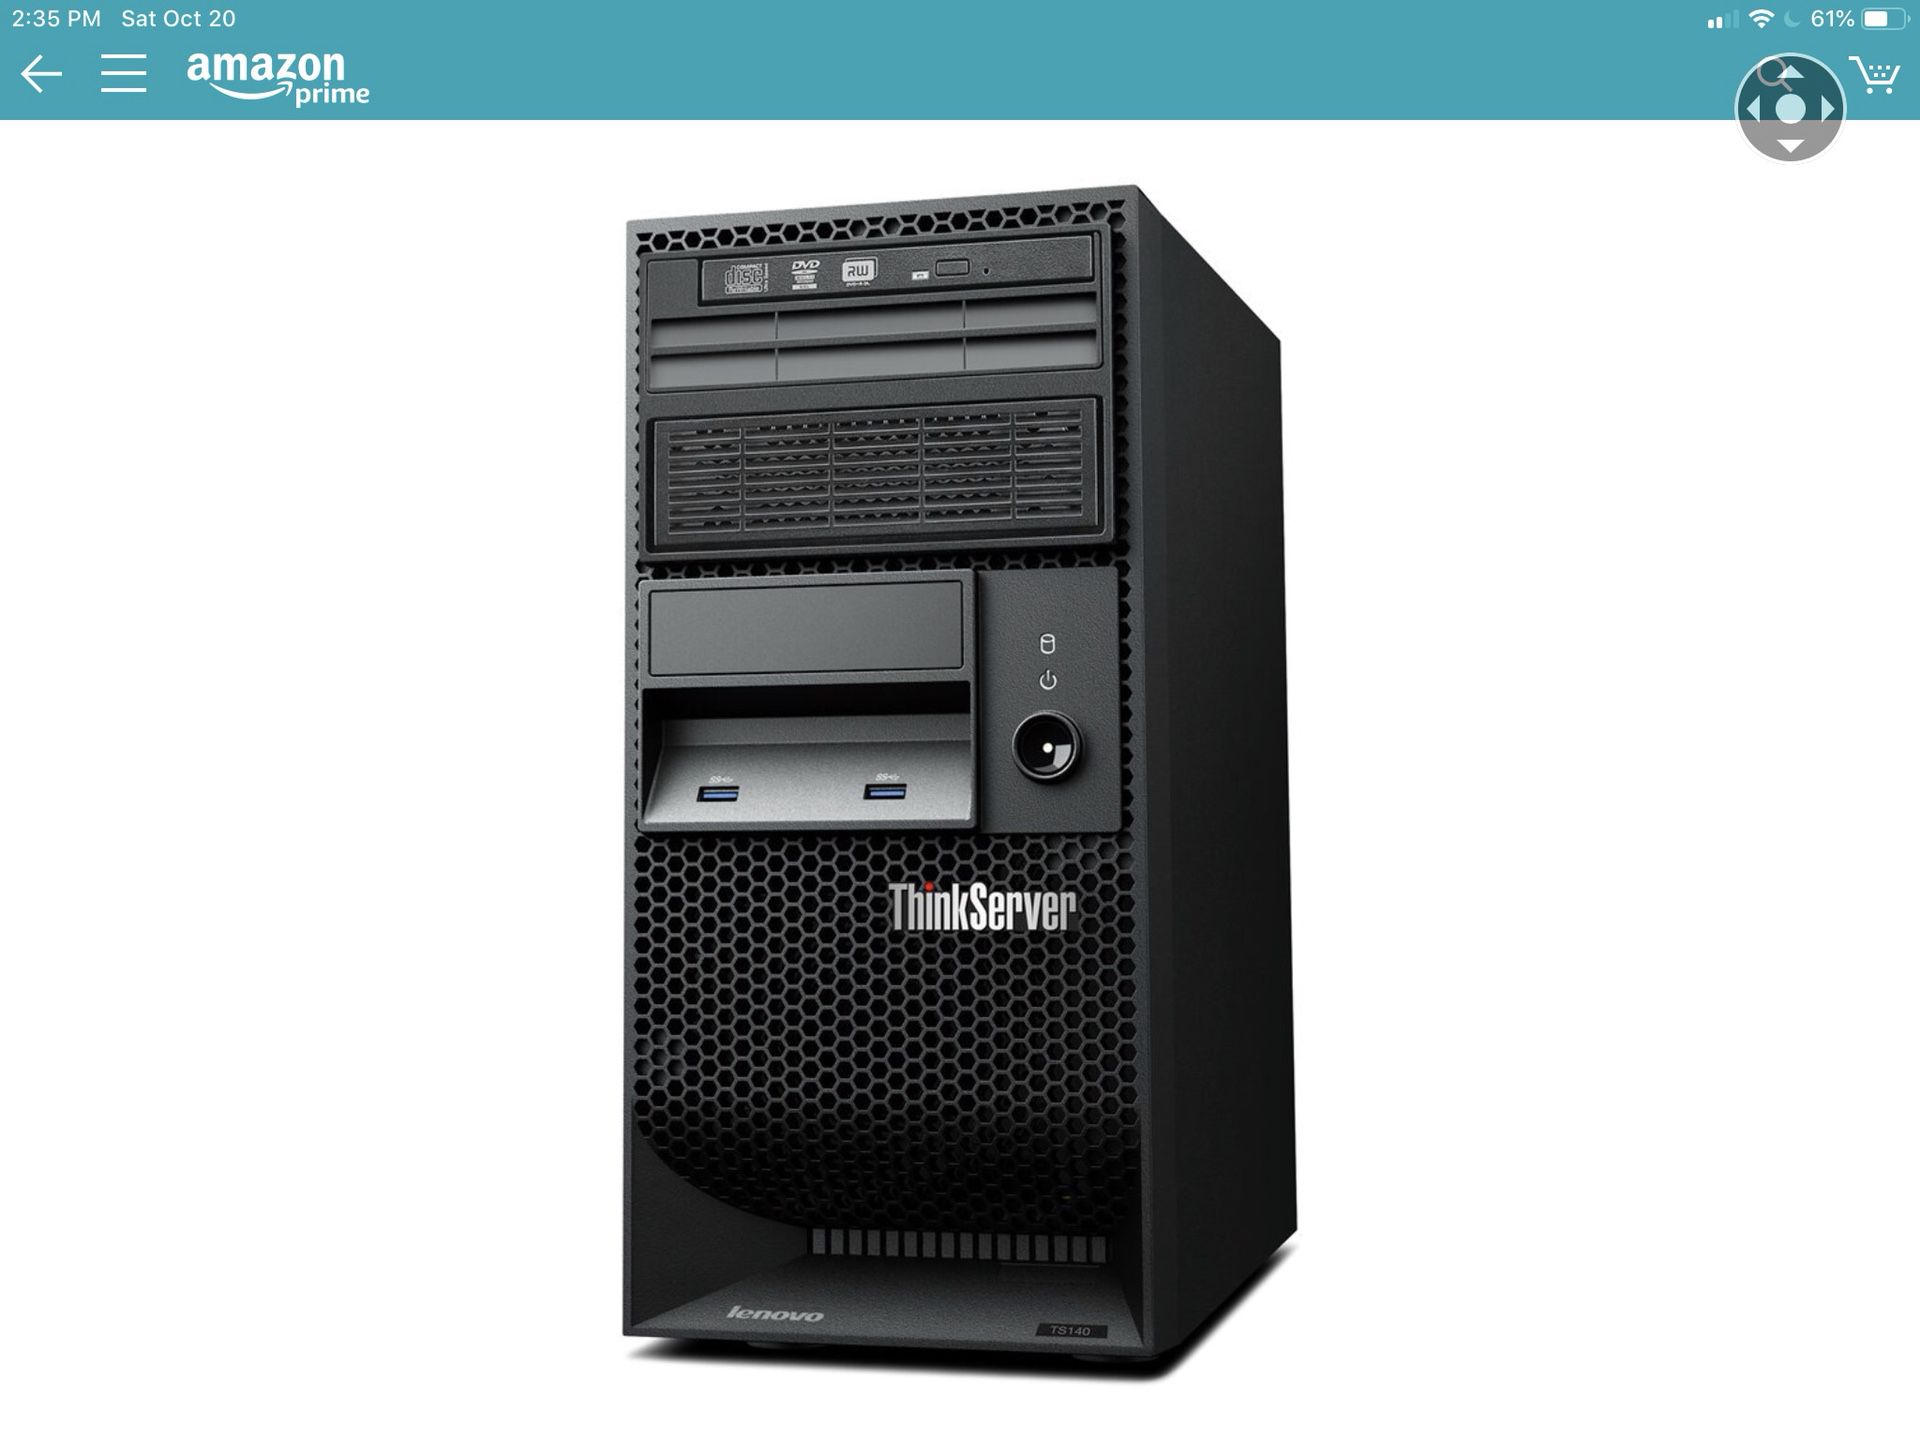 Lenovo Think Server TS140 hardly used in mint condition with 20” monitor and Samsung 850 EVO 250 GB SD drive